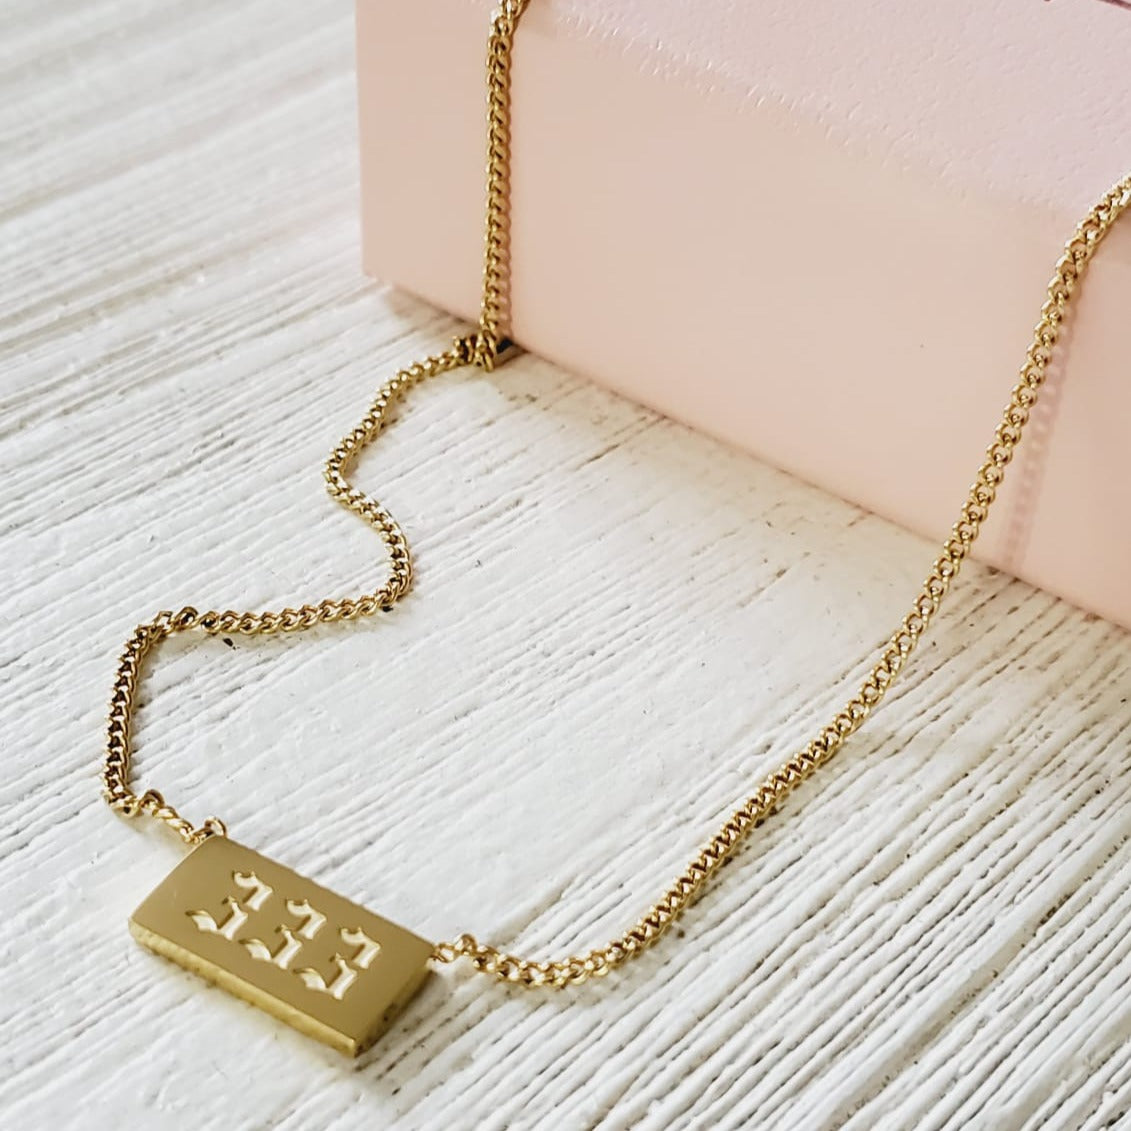 angel numbers necklace, angel numbers jewelry, 111 necklace, 111 jewelry, 222 necklace, 222 jewelry, 333 necklace, 333 jewelry, 444 necklace, 444 jewelry, 555 necklace, 555 jewelry, 777 necklace, 777 jewelry, 888 necklace, 888 jewelry, 999 necklace, 999 jewelry, 000 necklace, 000 jewelry, manifestation jewelry, manifestation necklace, abundance necklace, abundance jewelry, spiritual jewelry, spiritual necklace